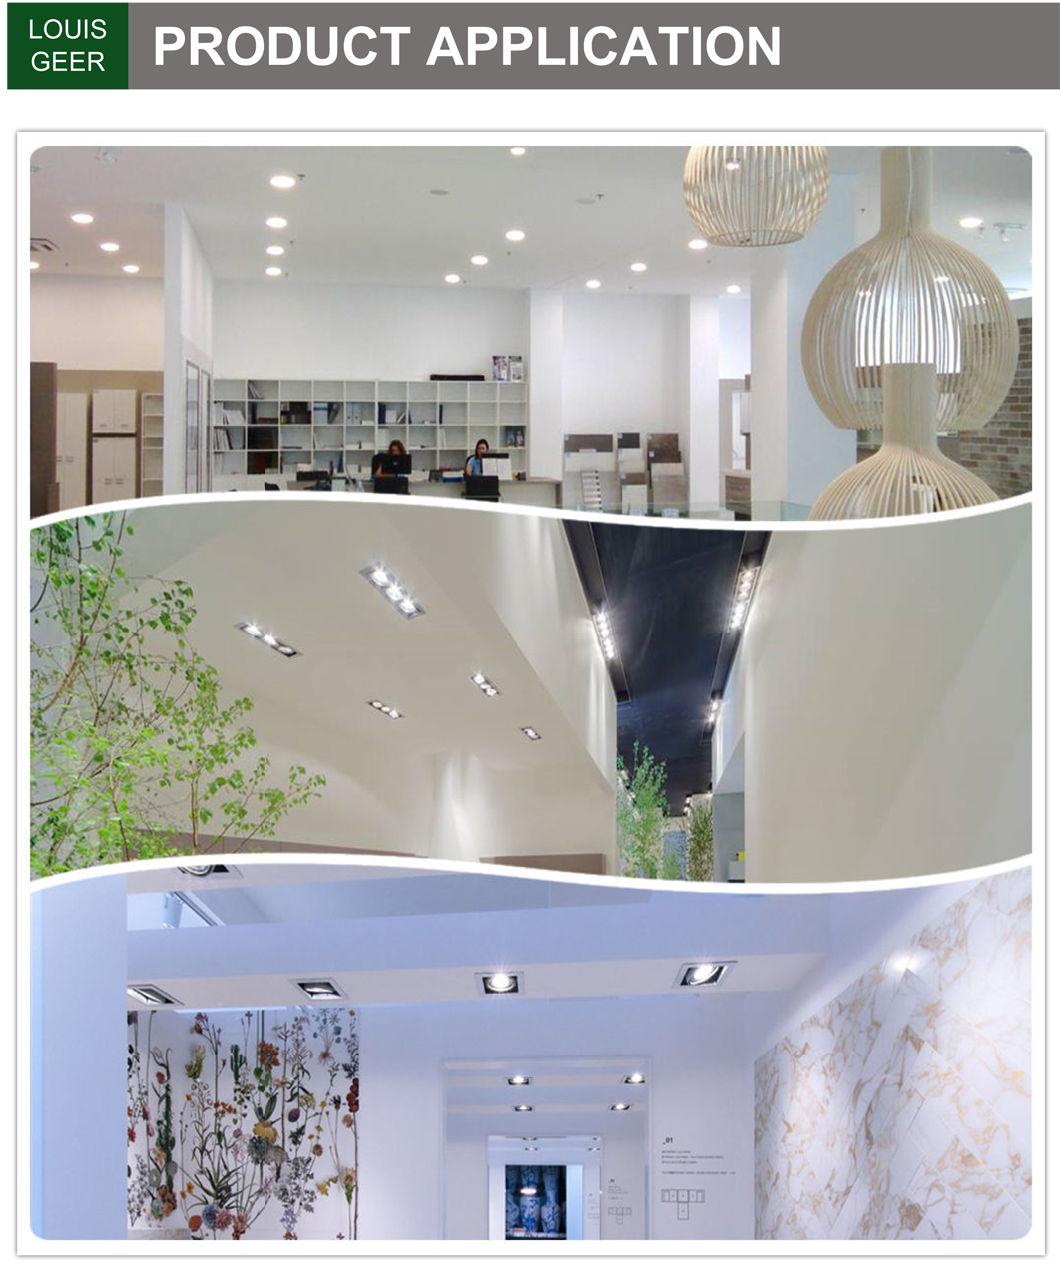 High Quality Materials Dimmable LED Downlights Recessed Shiny Finished Recessed Downlight